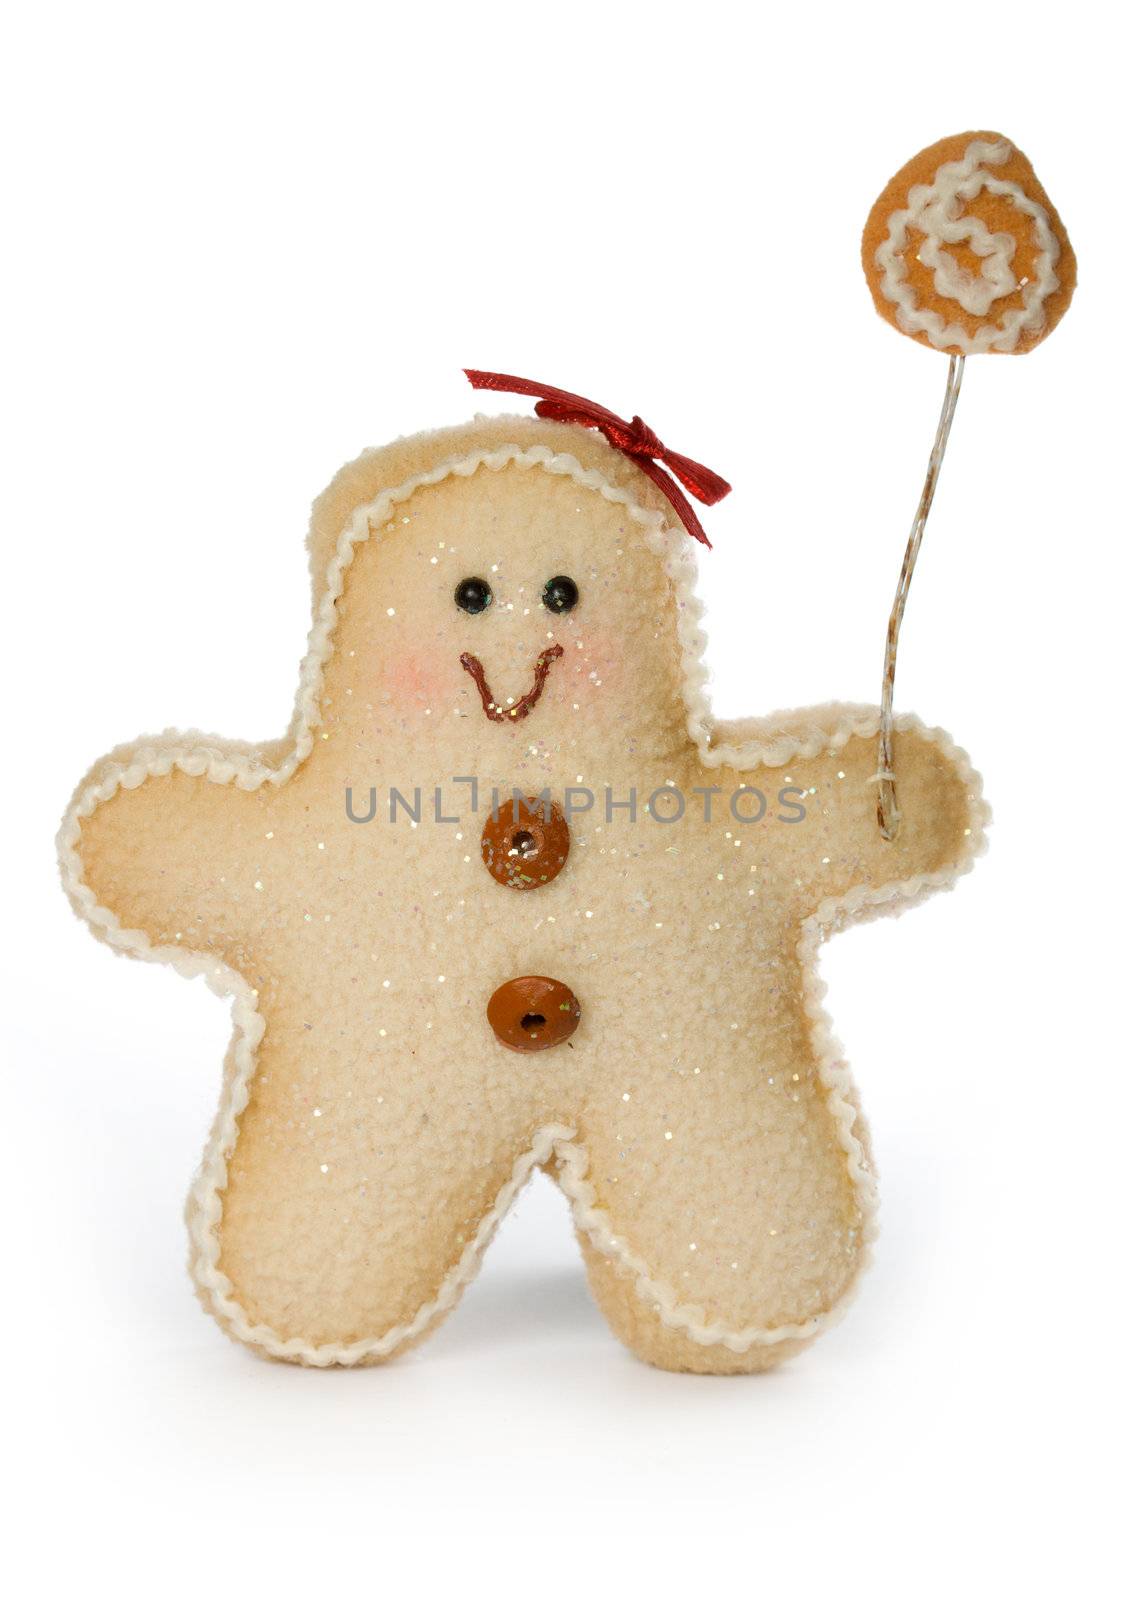 Gingerbread man toy by RuthBlack